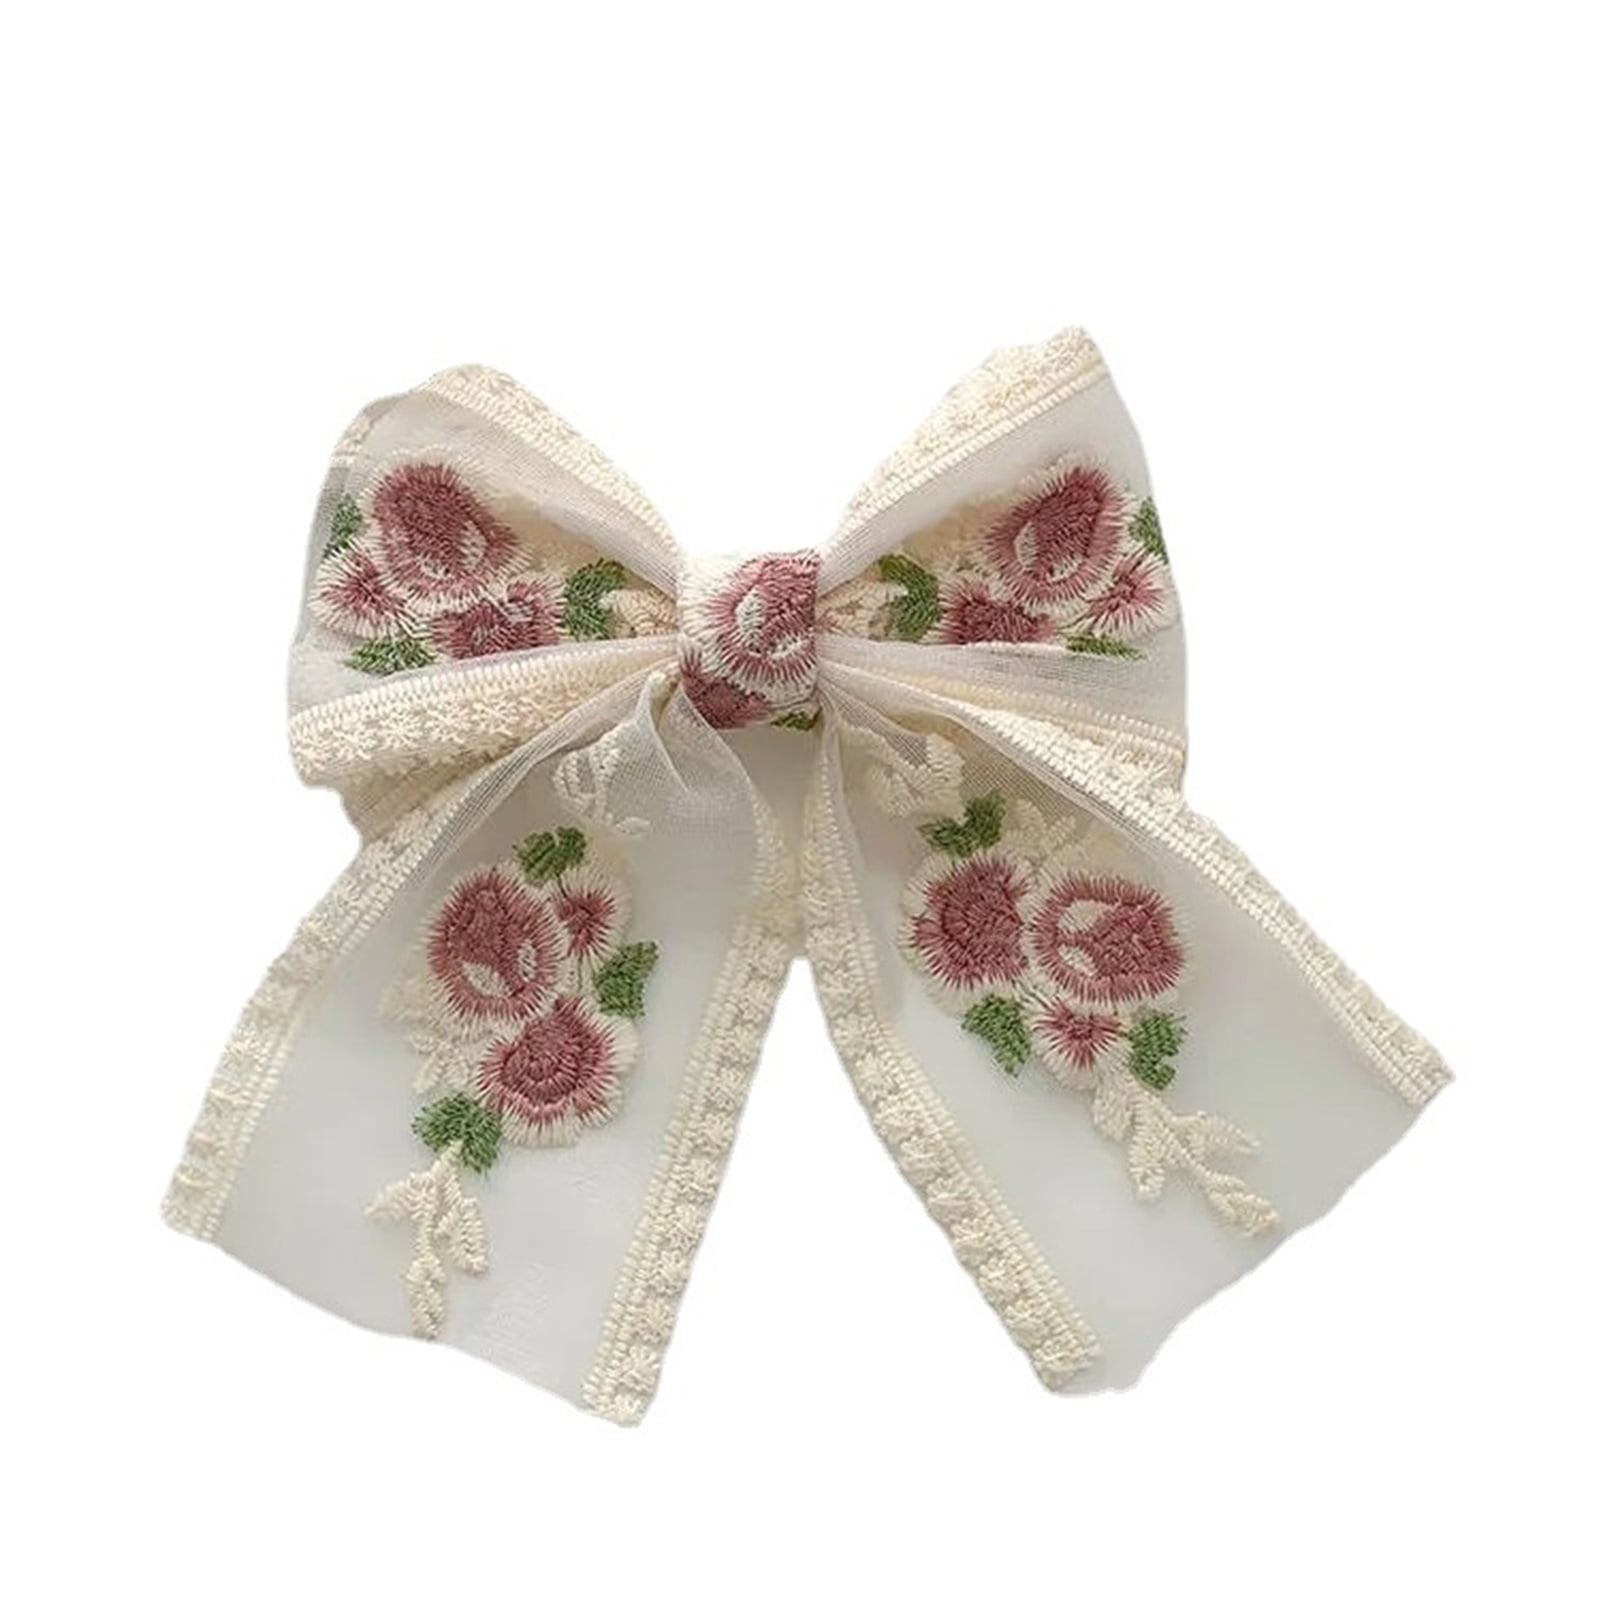  JONKY Bow Hair Clips White Lace Hair Accessory Party Non Slip  Flower Hair Bow Hair Barrettes Hair Piece for Women and Girls : Beauty &  Personal Care